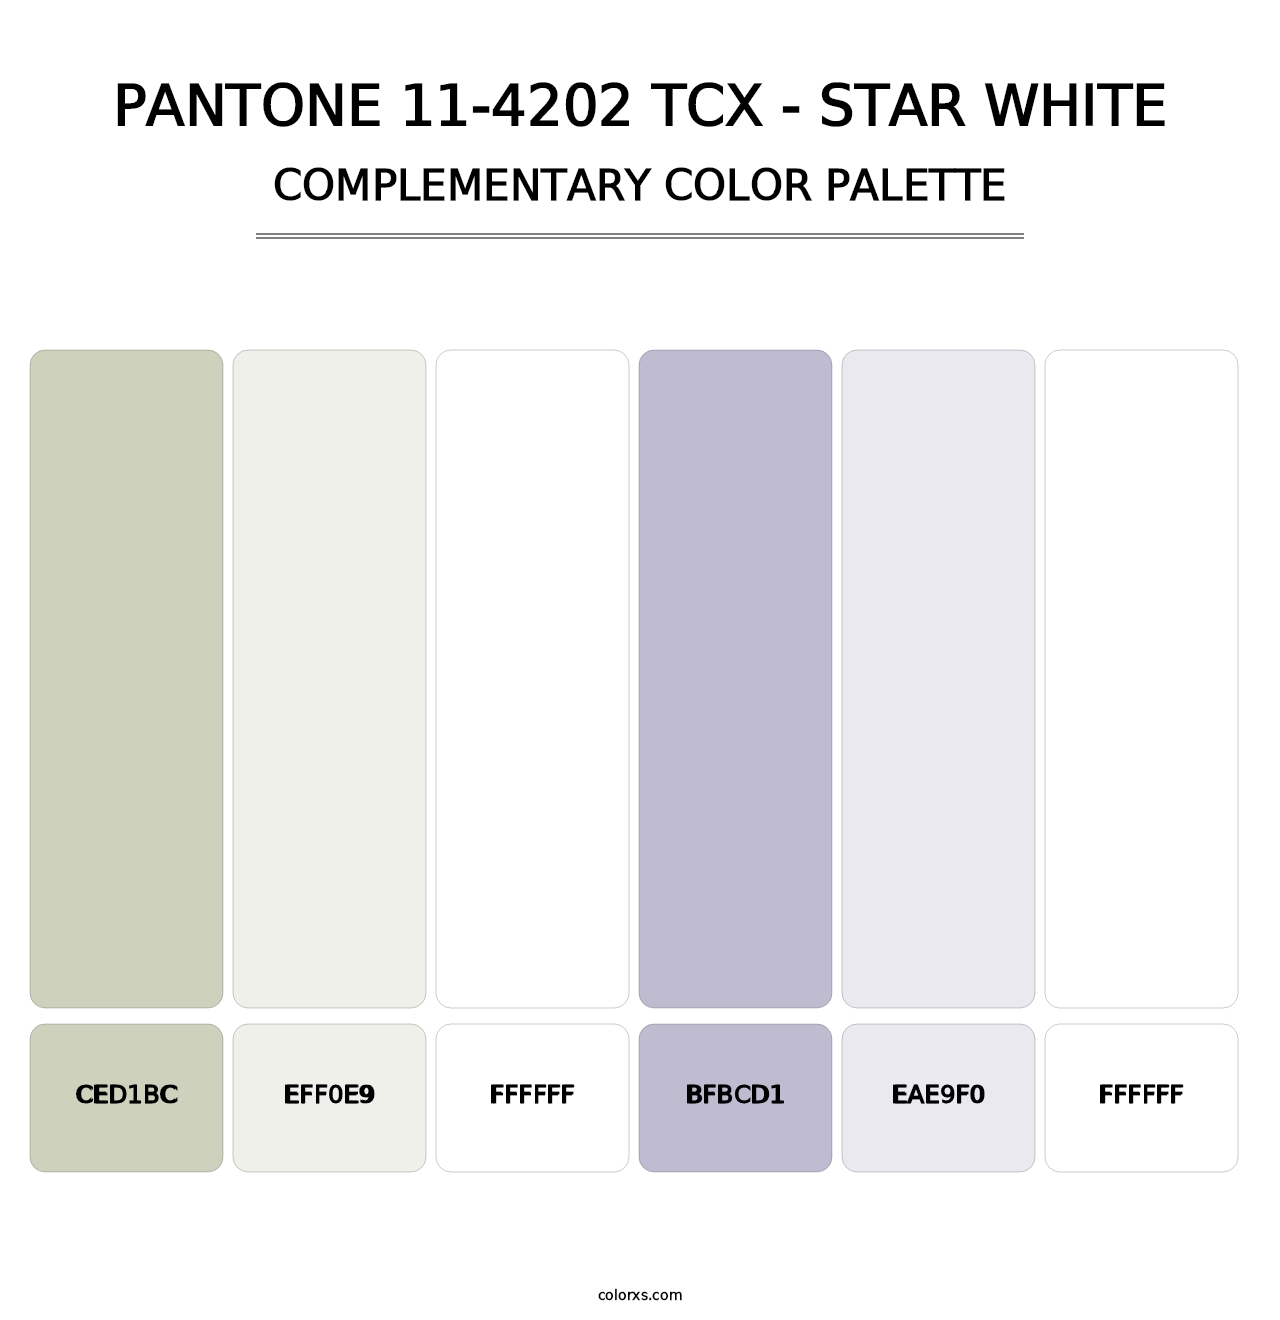 PANTONE 11-4202 TCX - Star White - Complementary Color Palette